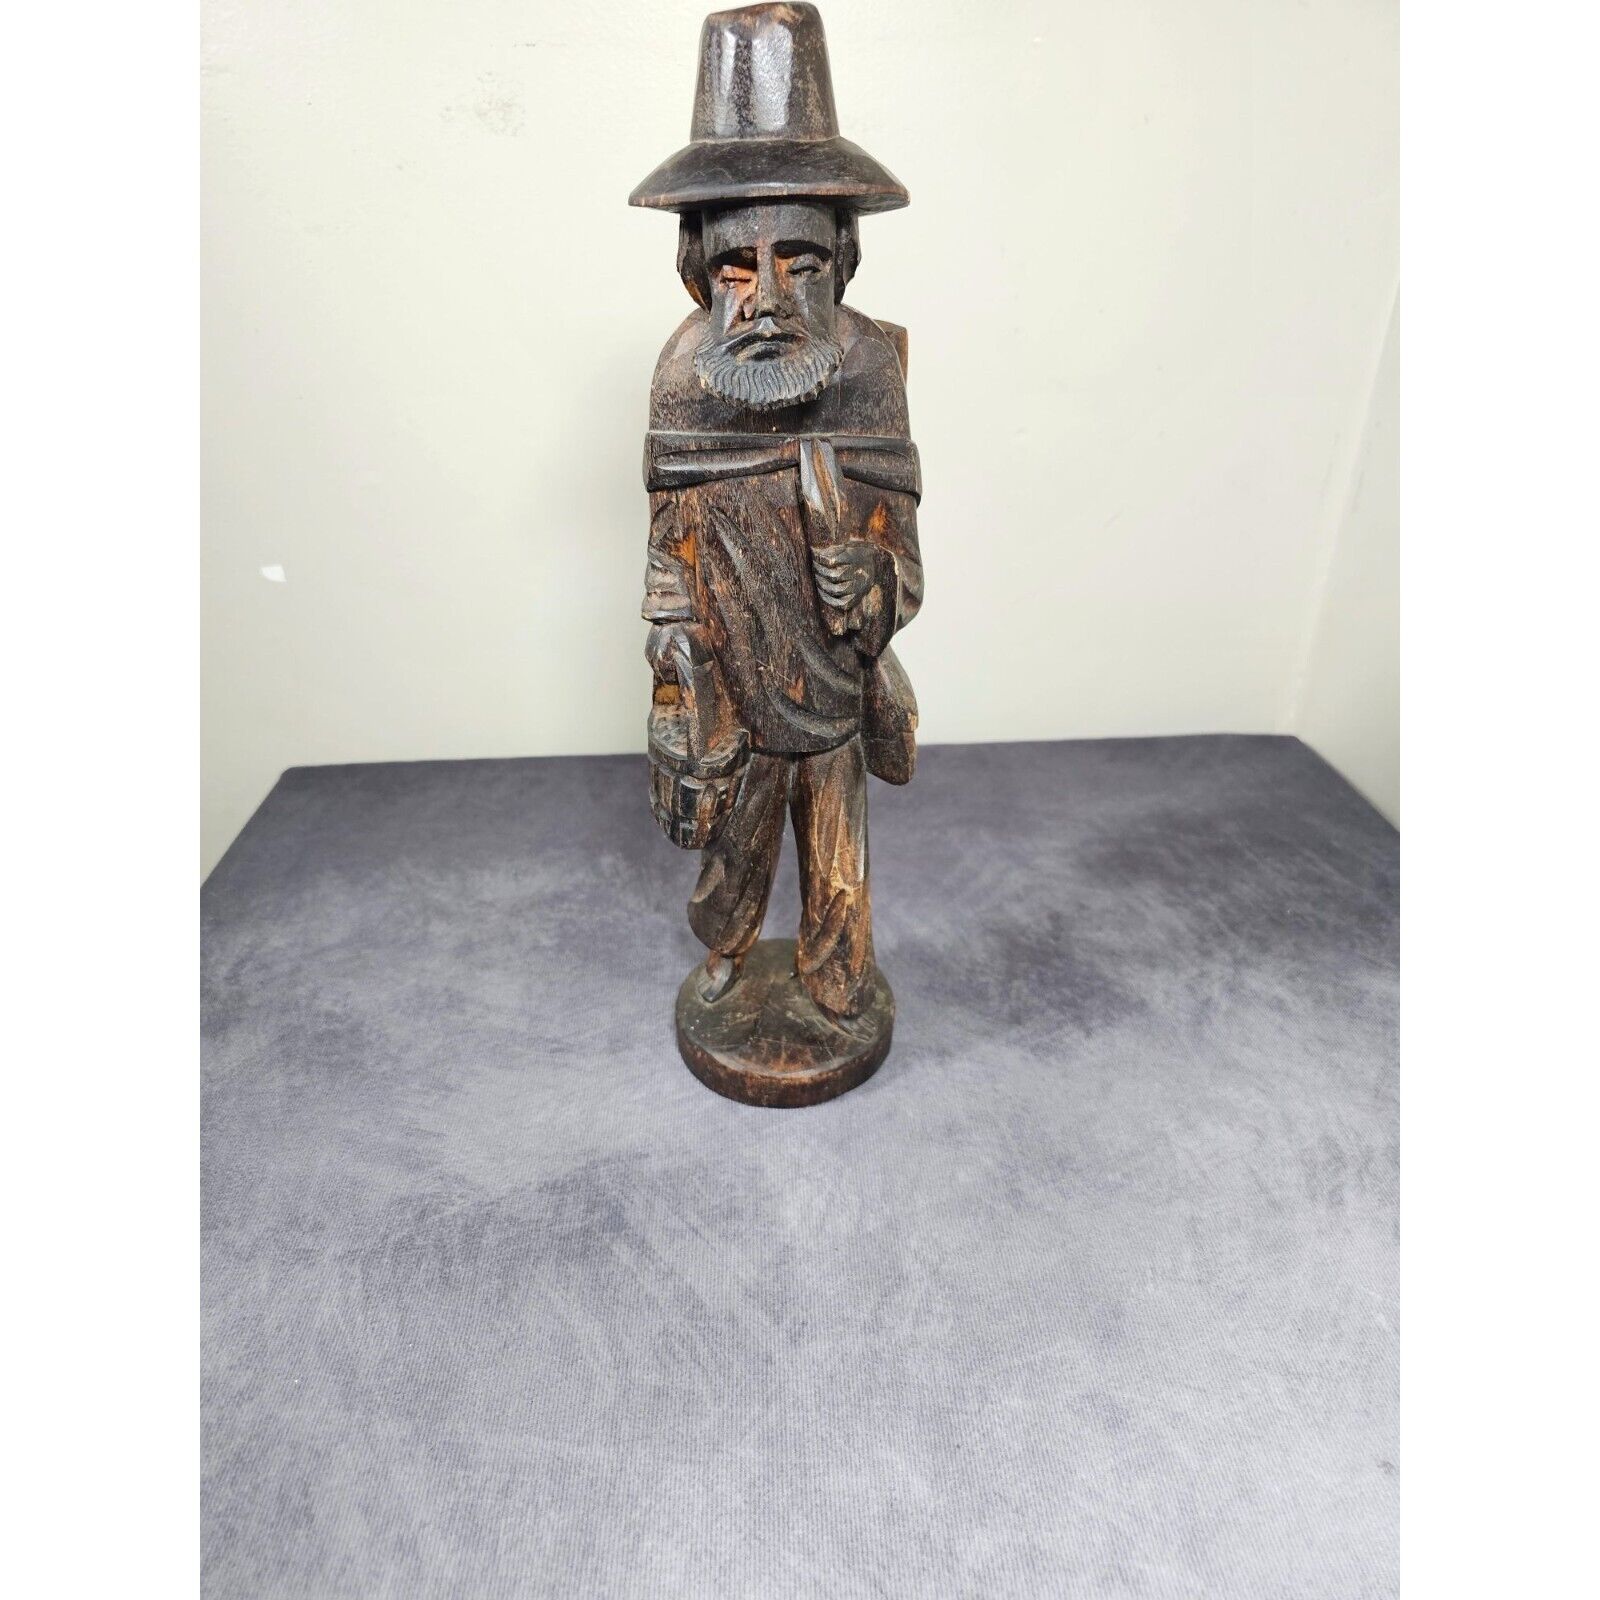 Vintage Hand Carved Wooden Old Man with Bucket /Barefoot